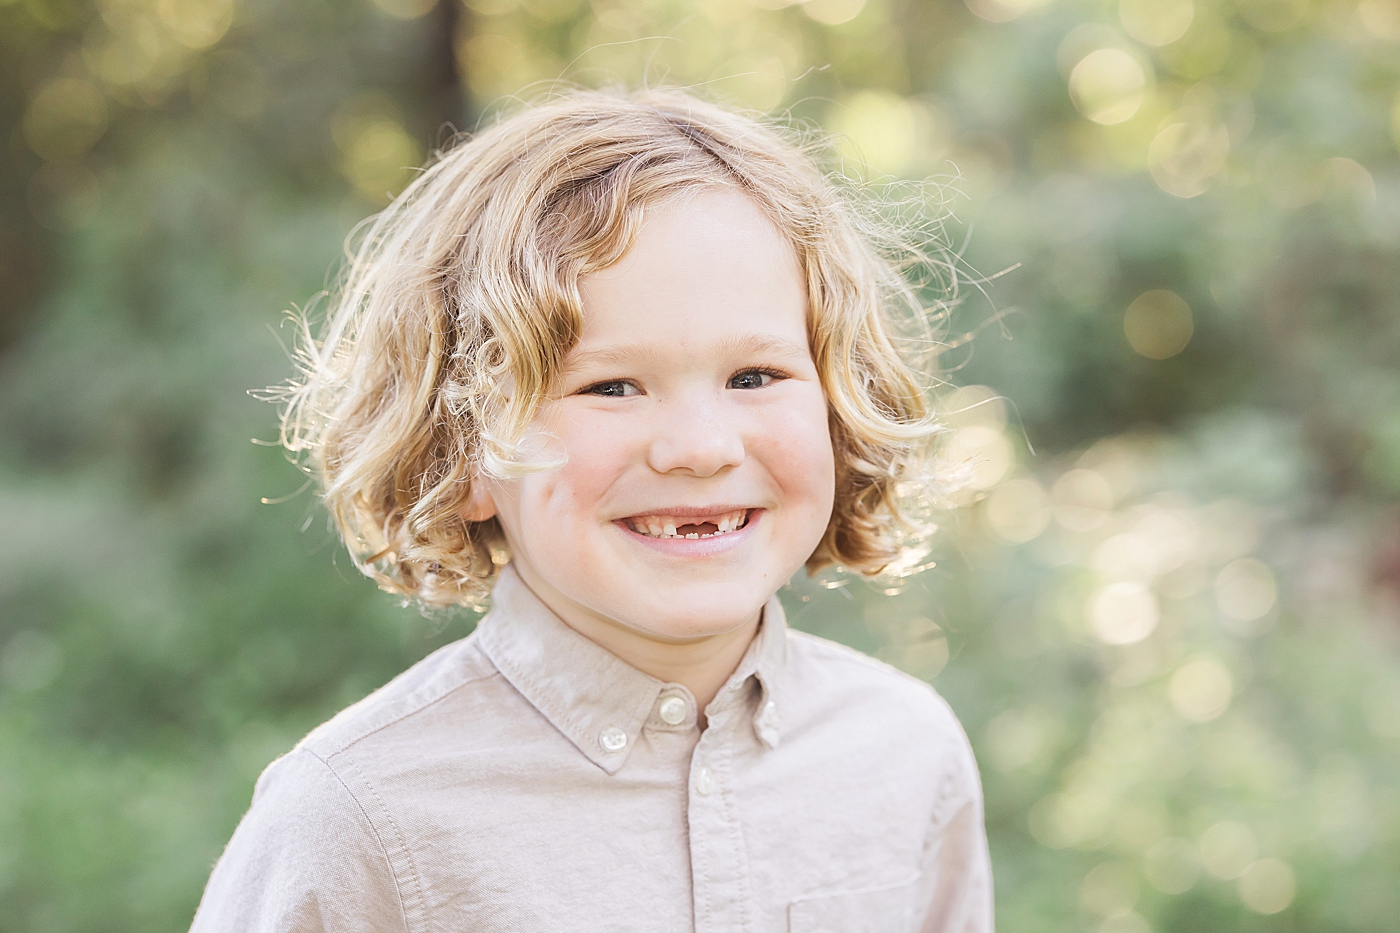 Young boy smiling with missing two front teeth! Photo by Fresh Light Photography